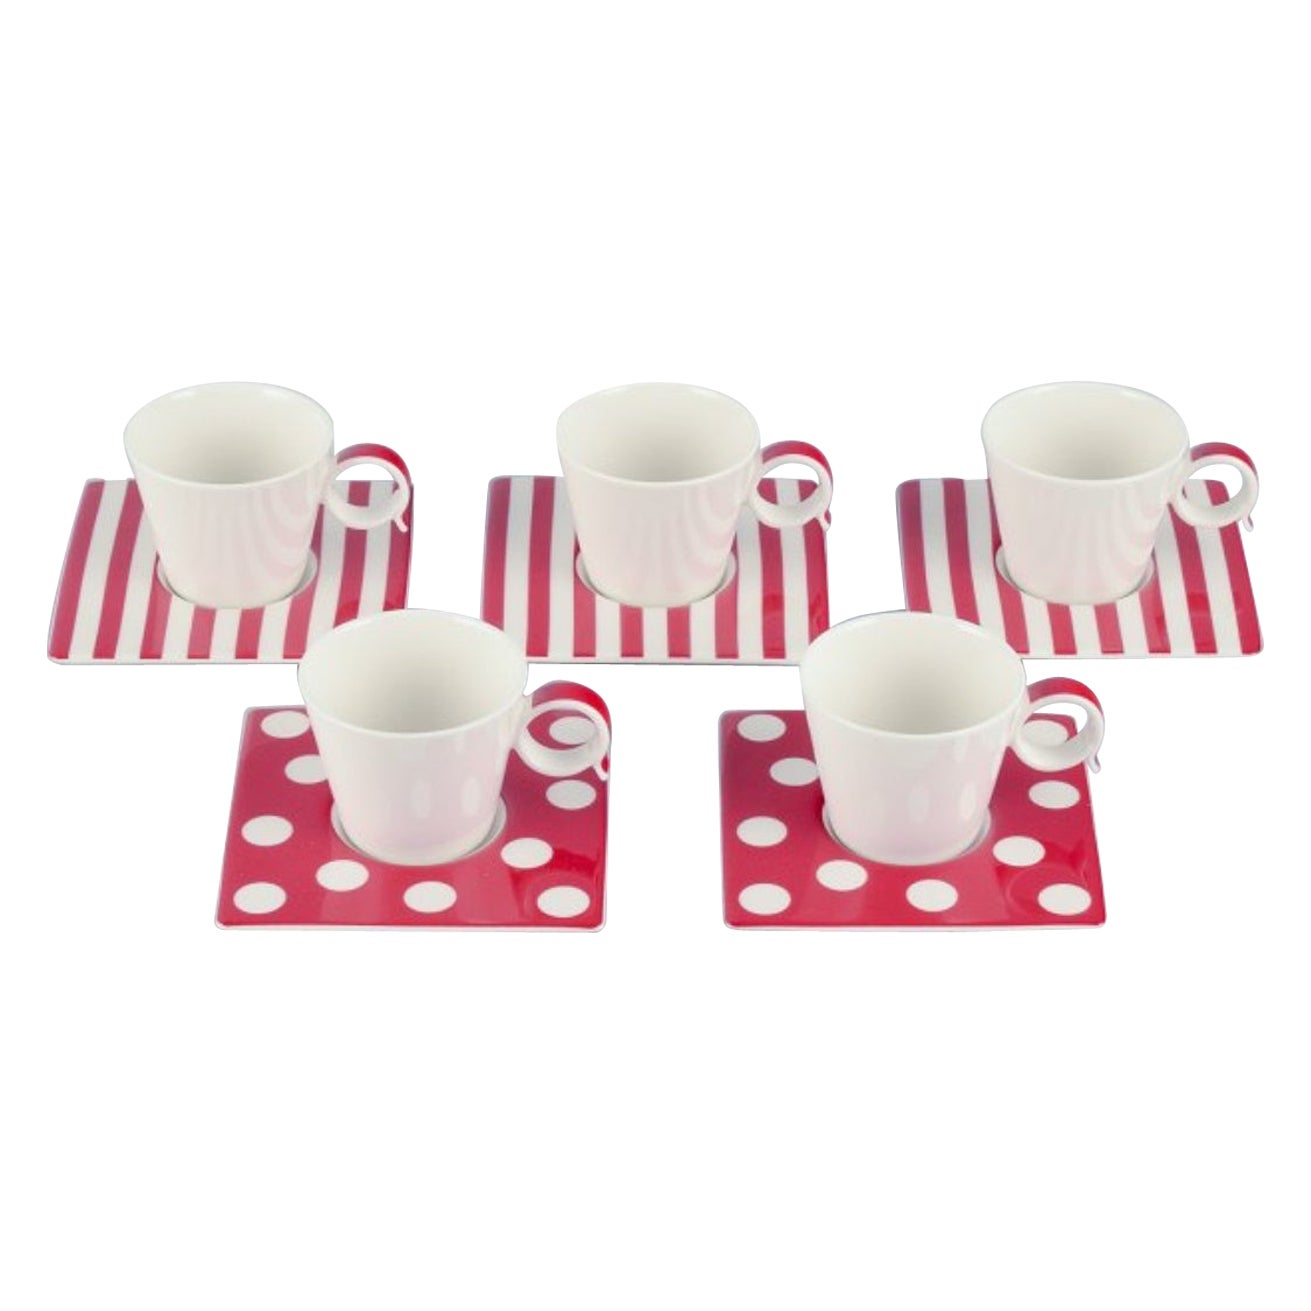 Royal Fine China, set of five pairs of "Freshness Red" coffee cups. 